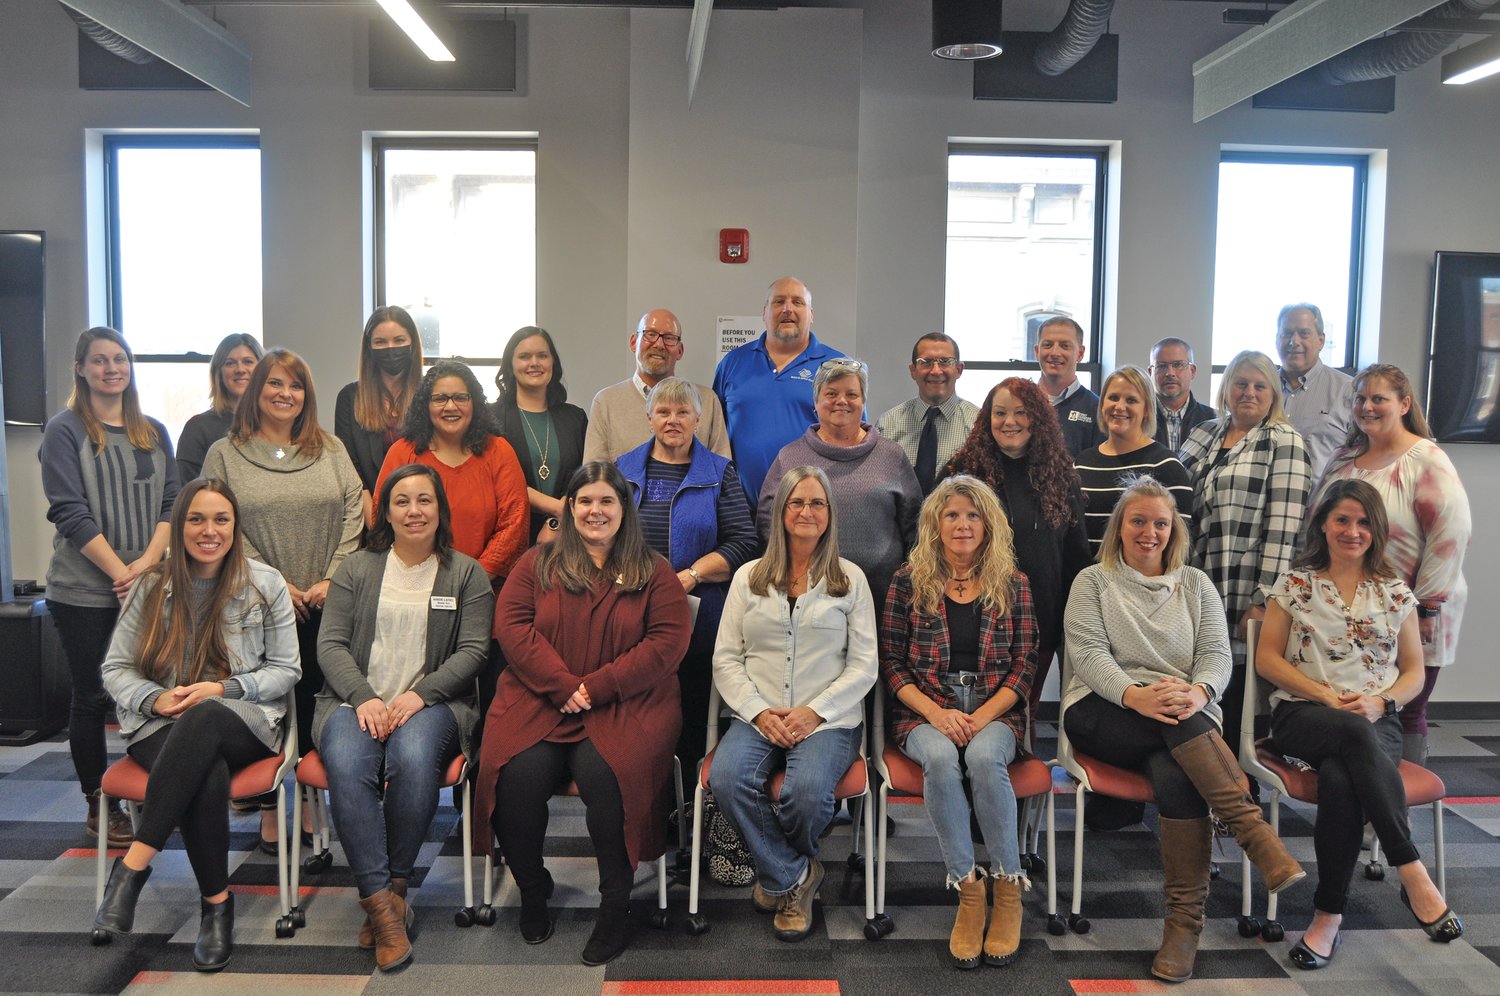 Representatives from nonprofit agencies that accepted grants from the Montgomery County Community Foundation Thursday are pictured in Fusion 54. MCCF awarded $249,495 to 16 agencies in the latest grant cycle.